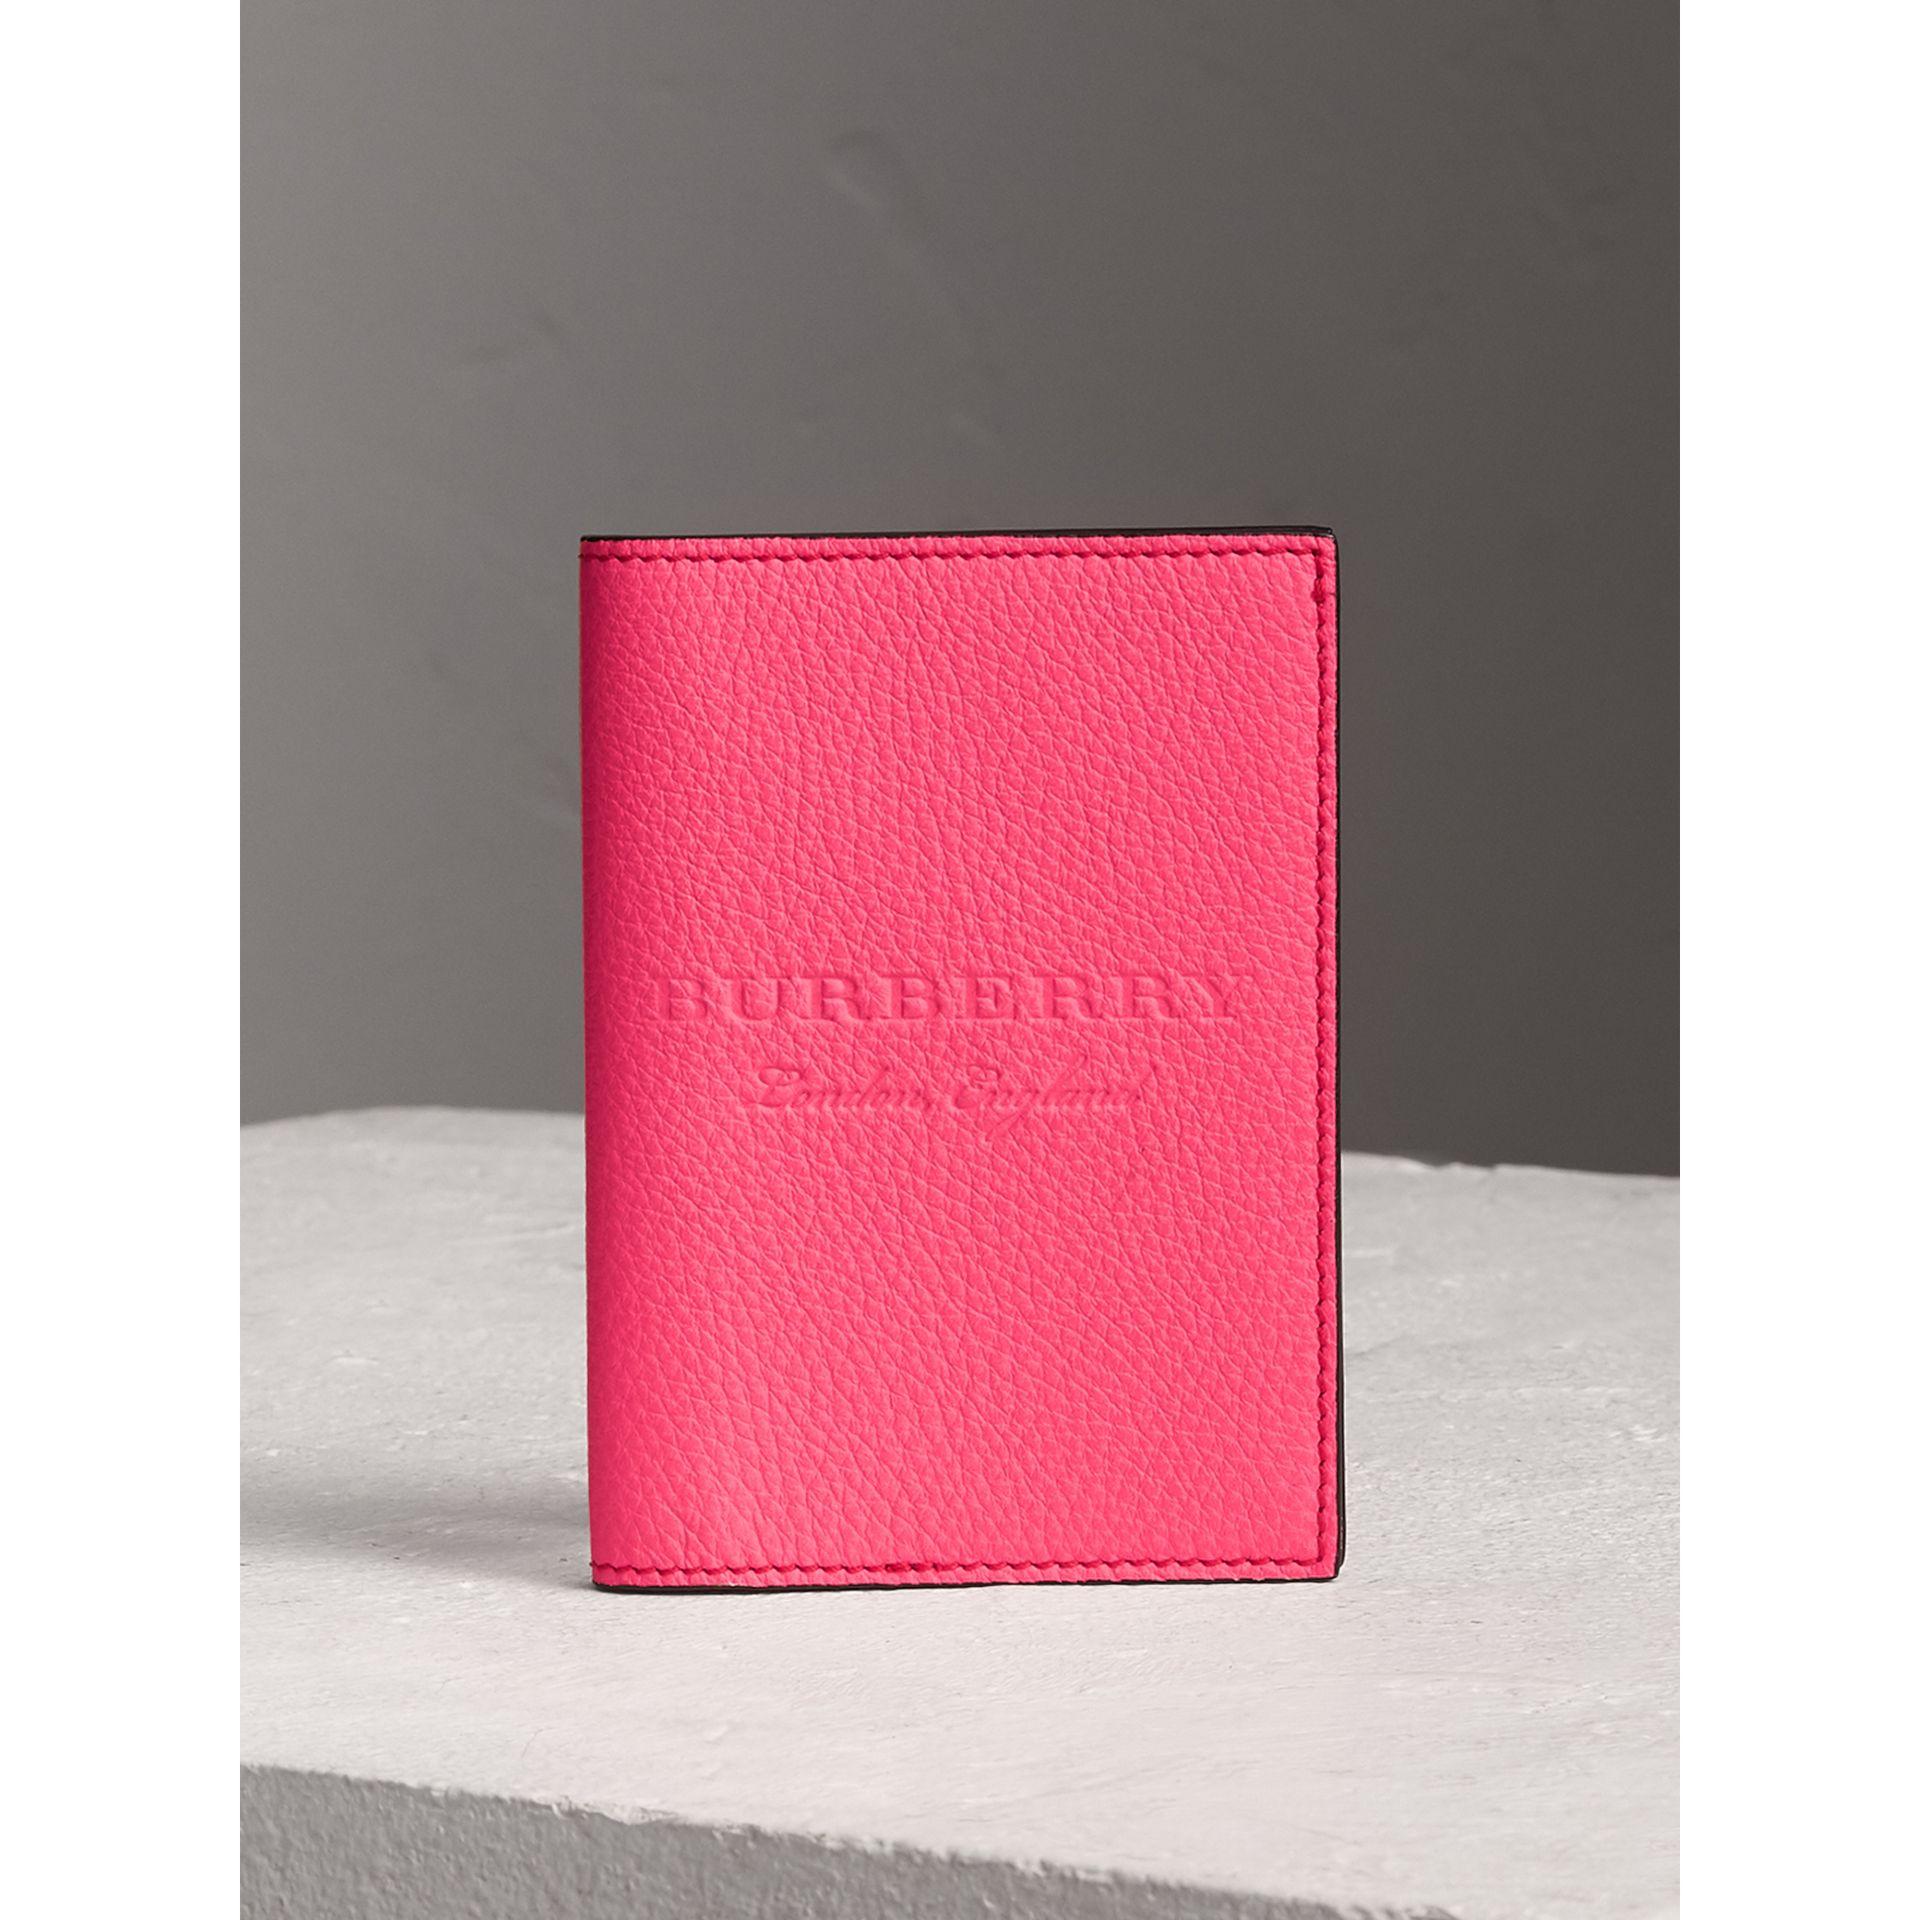 Burberry Embossed Leather Passport Holder In Bright Pink | ModeSens